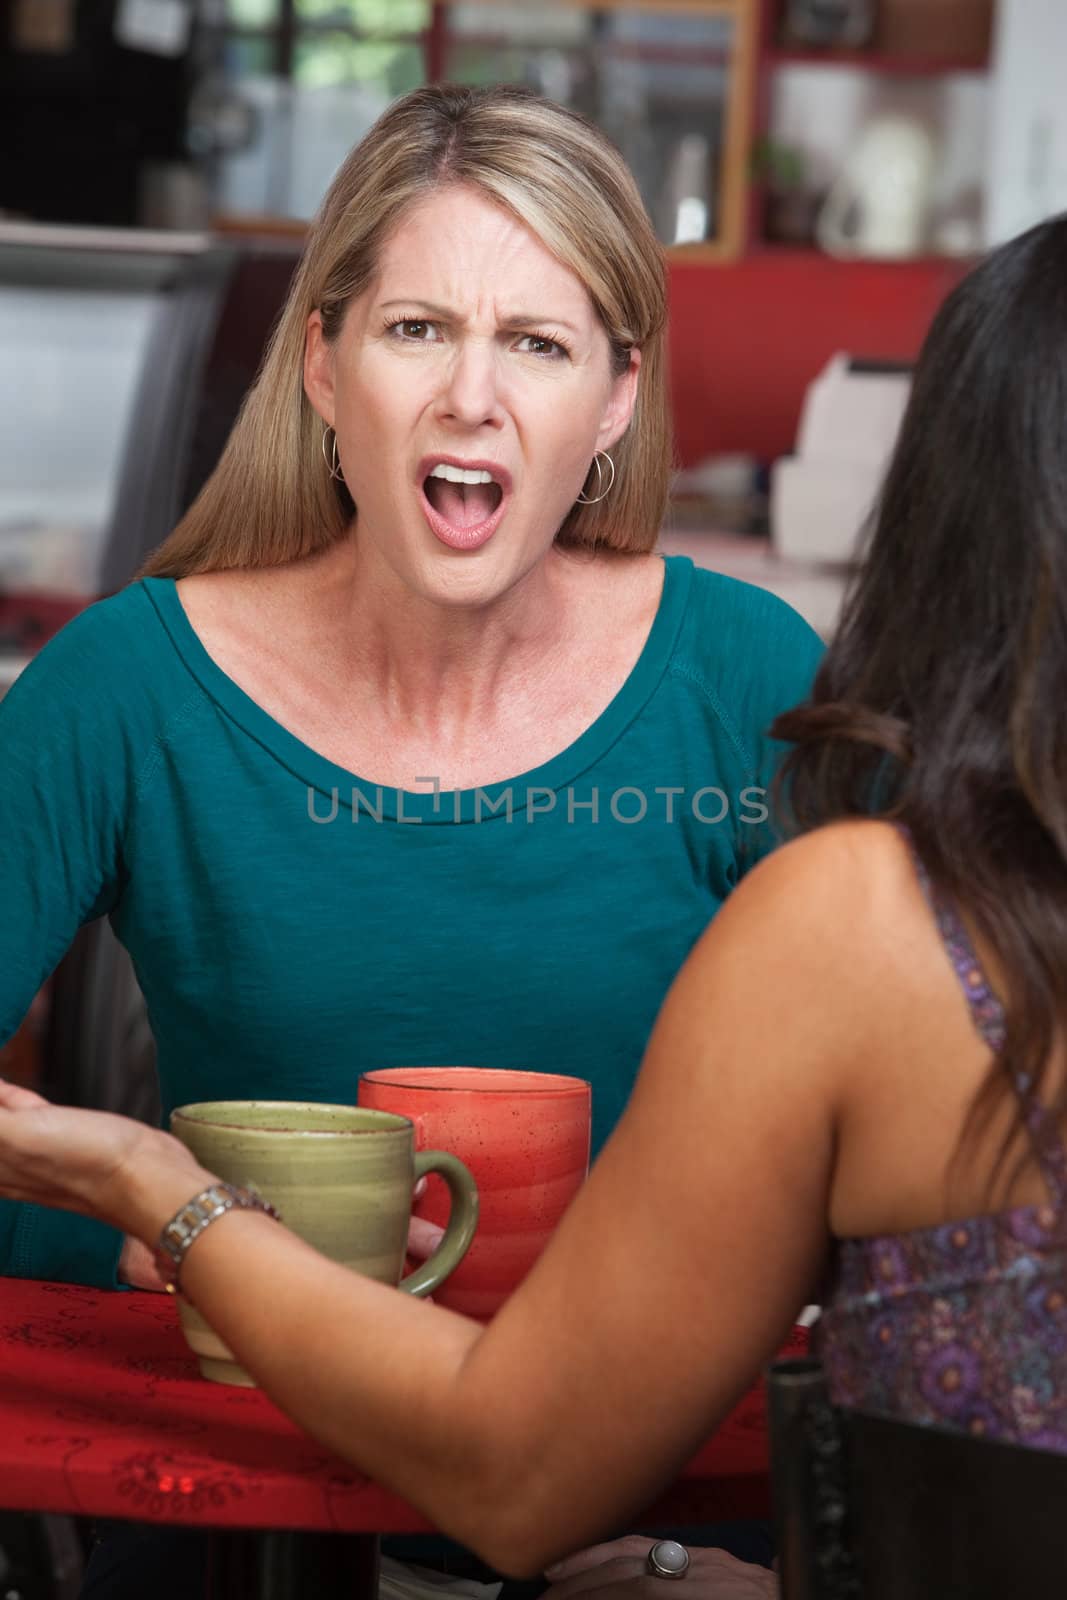 Outraged Lady in Cafe by Creatista